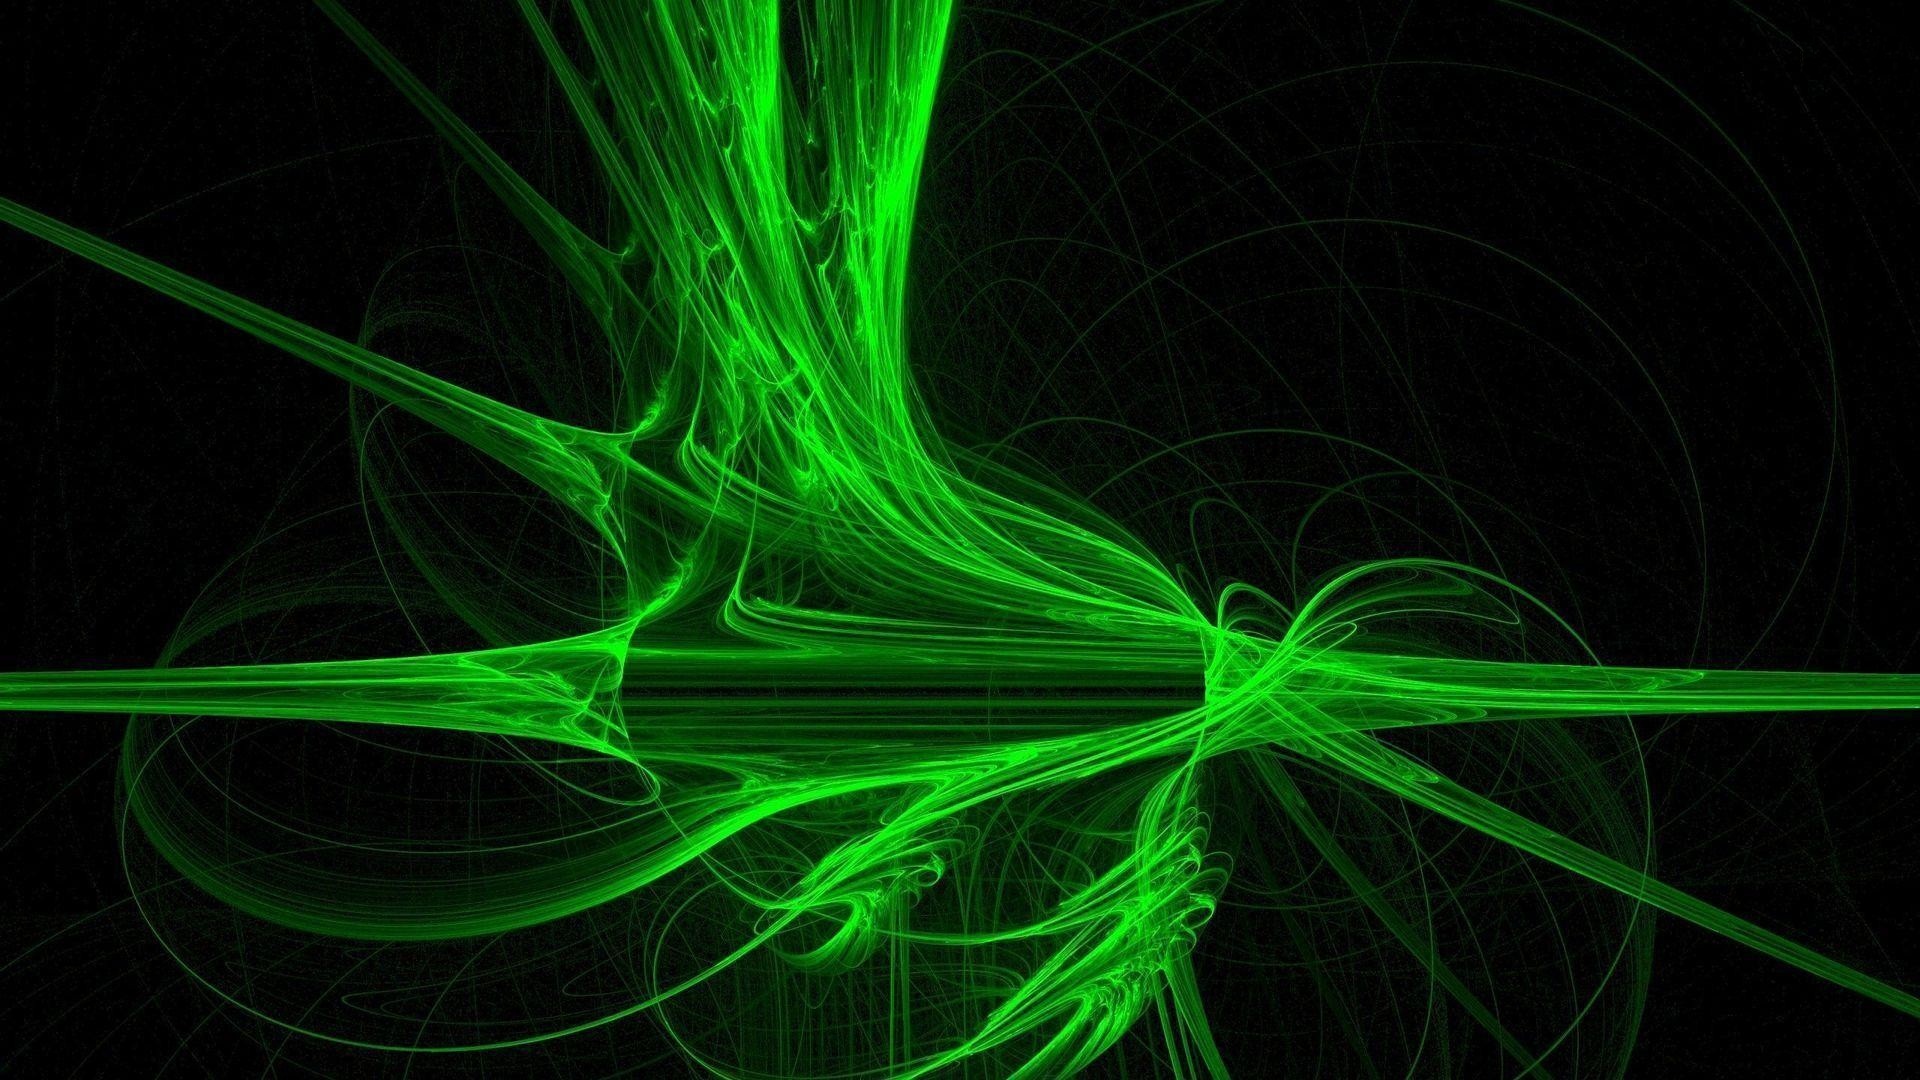 Wallpaper Neon Green Desktop with image resolution 1920x1080 pixel. You can use this wallpaper as background for your desktop Computer Screensavers, Android or iPhone smartphones